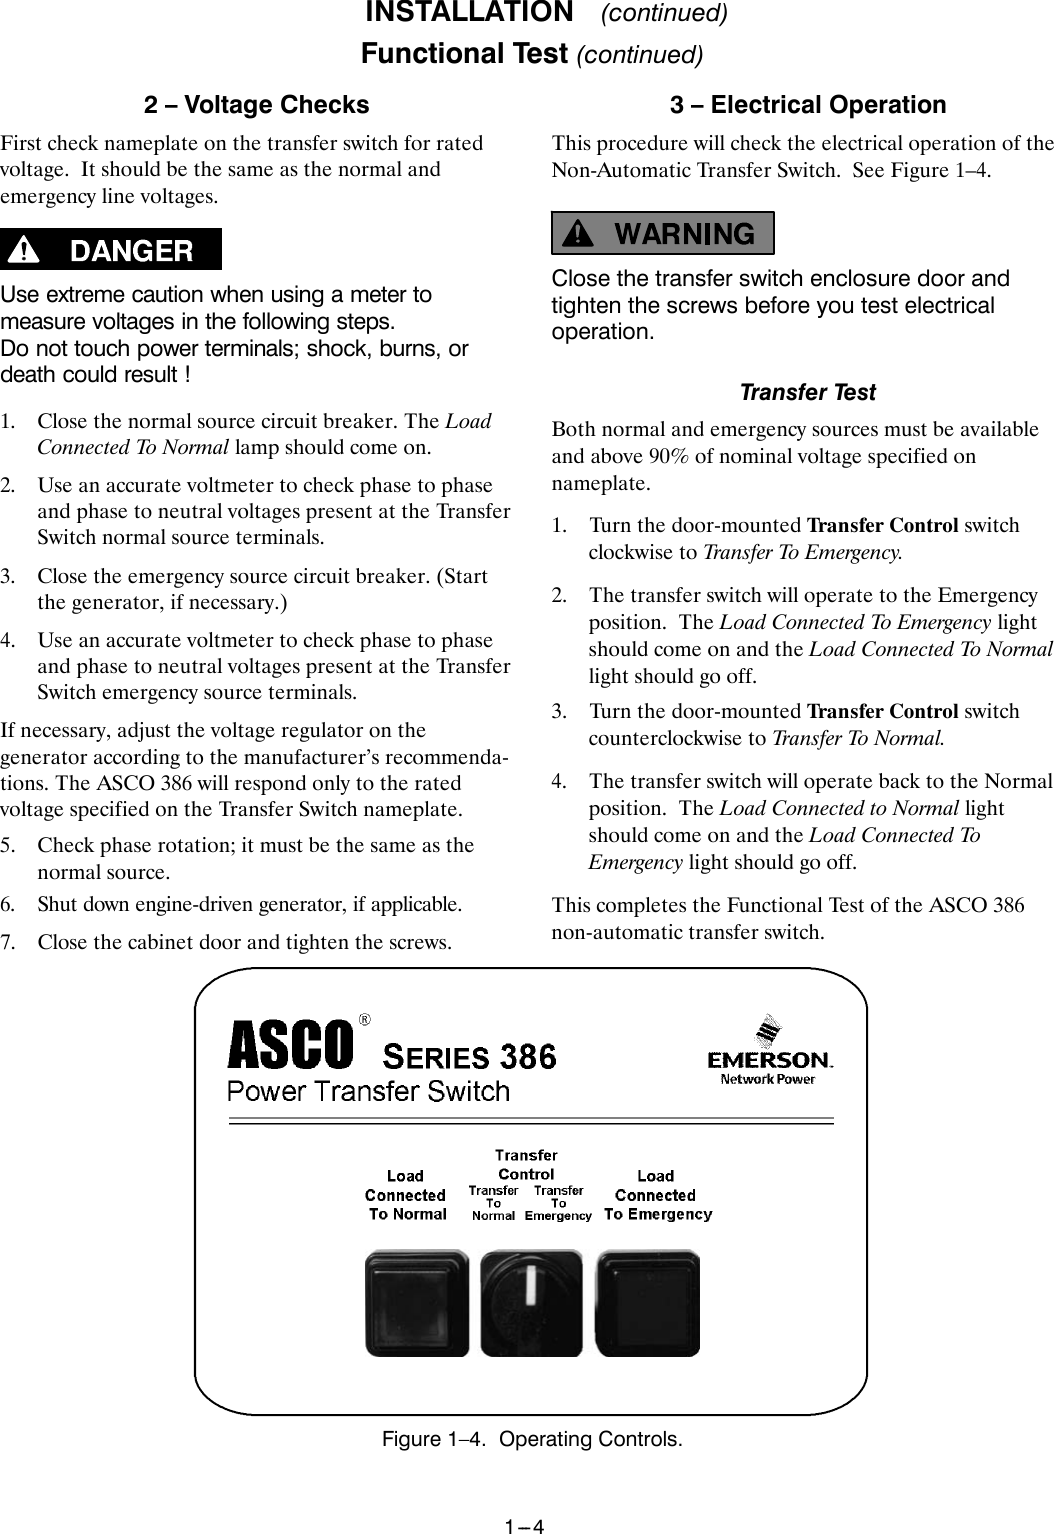 Page 6 of 12 - Emerson Emerson-Series-386-E-Design-Users-Manual- Operator's Manual For Series 386 N-ATS E 260-400 A, G 1000-3000 A UL/CSA  Emerson-series-386-e-design-users-manual